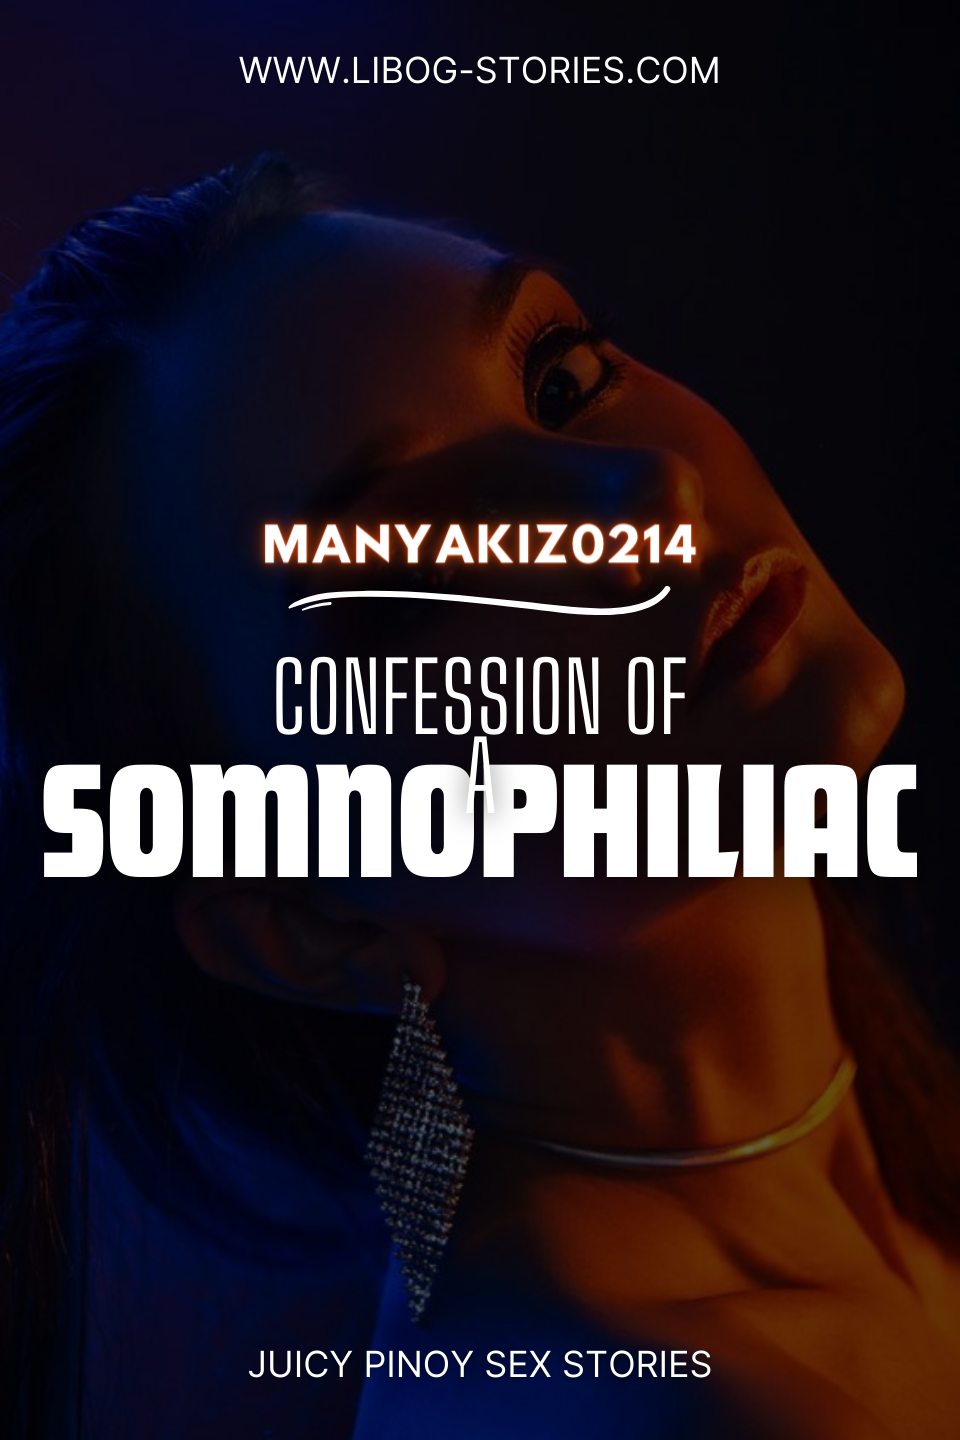 Confession of a Somnophiliac